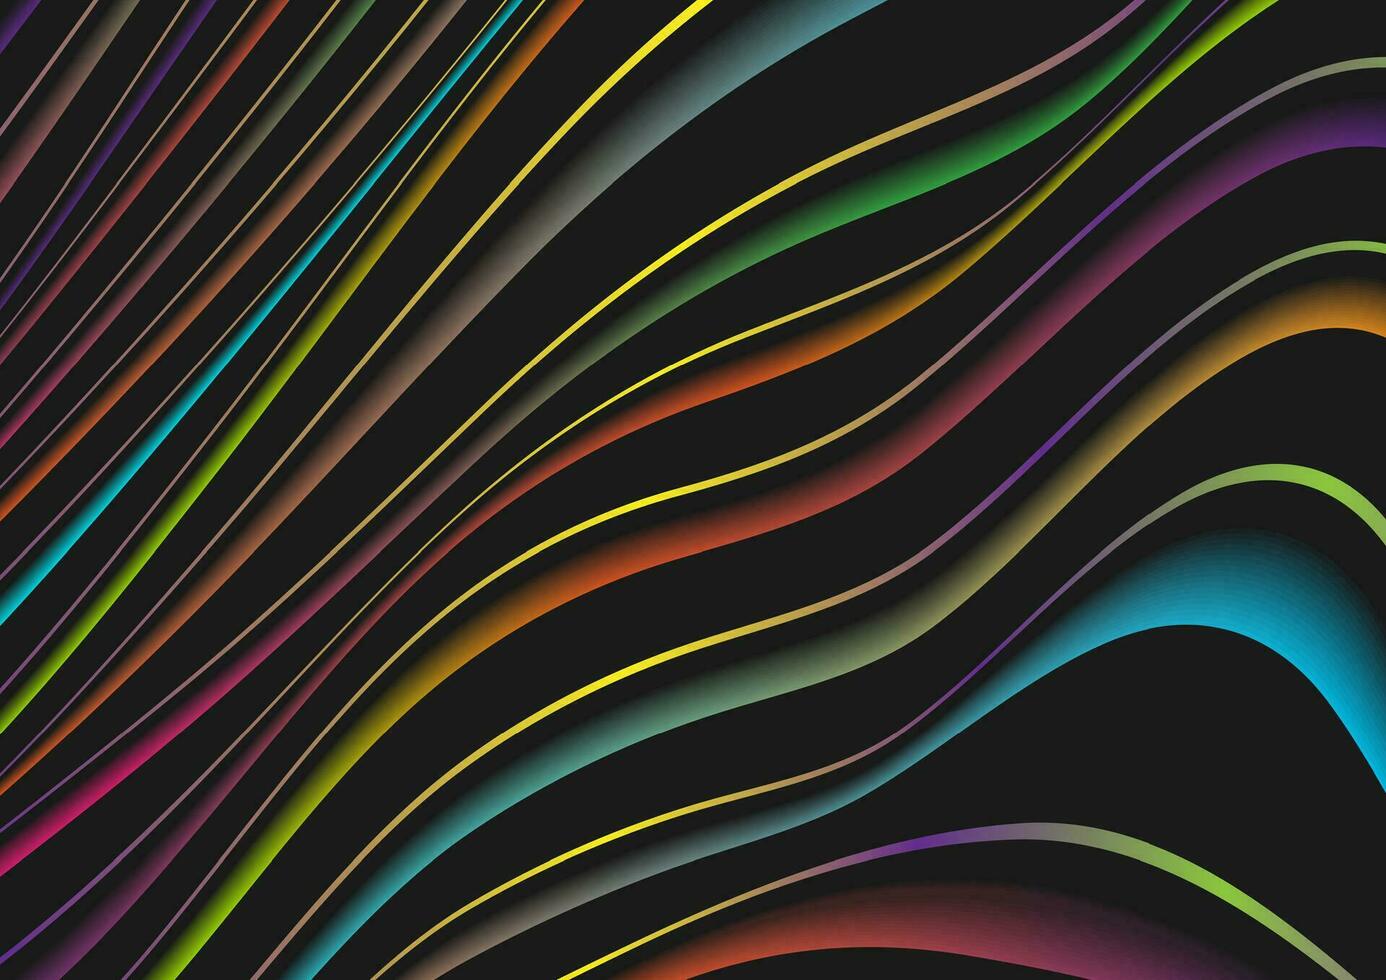 Colorful curved liquid waves abstract glowing background vector